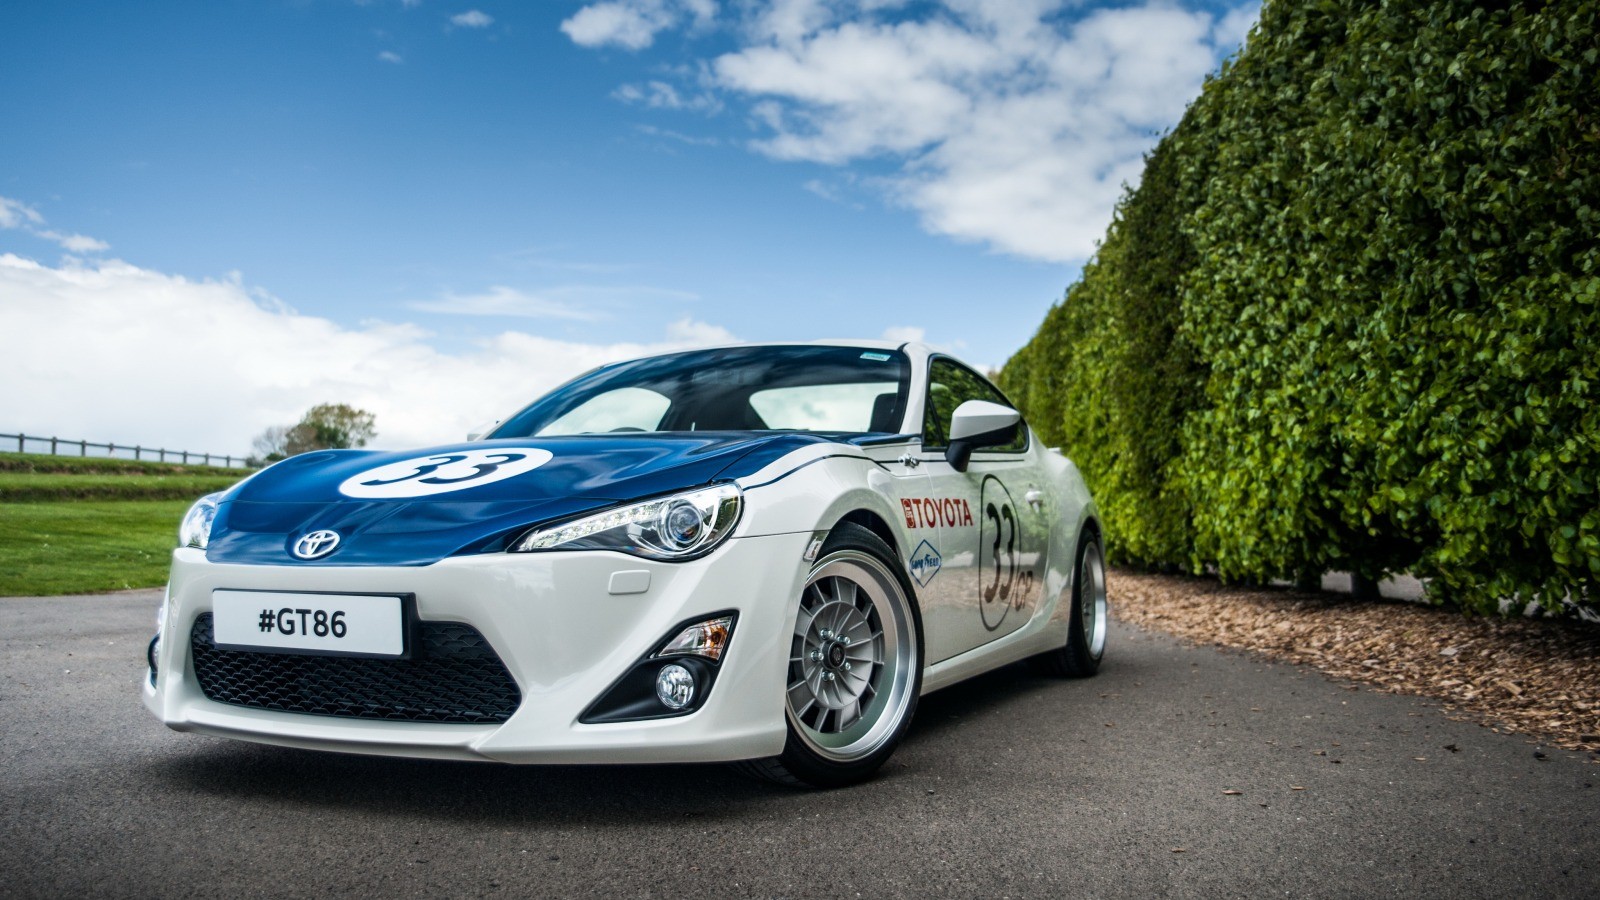 General 1600x900 car frontal view Toyobaru Toyota white cars race cars motorsport vehicle